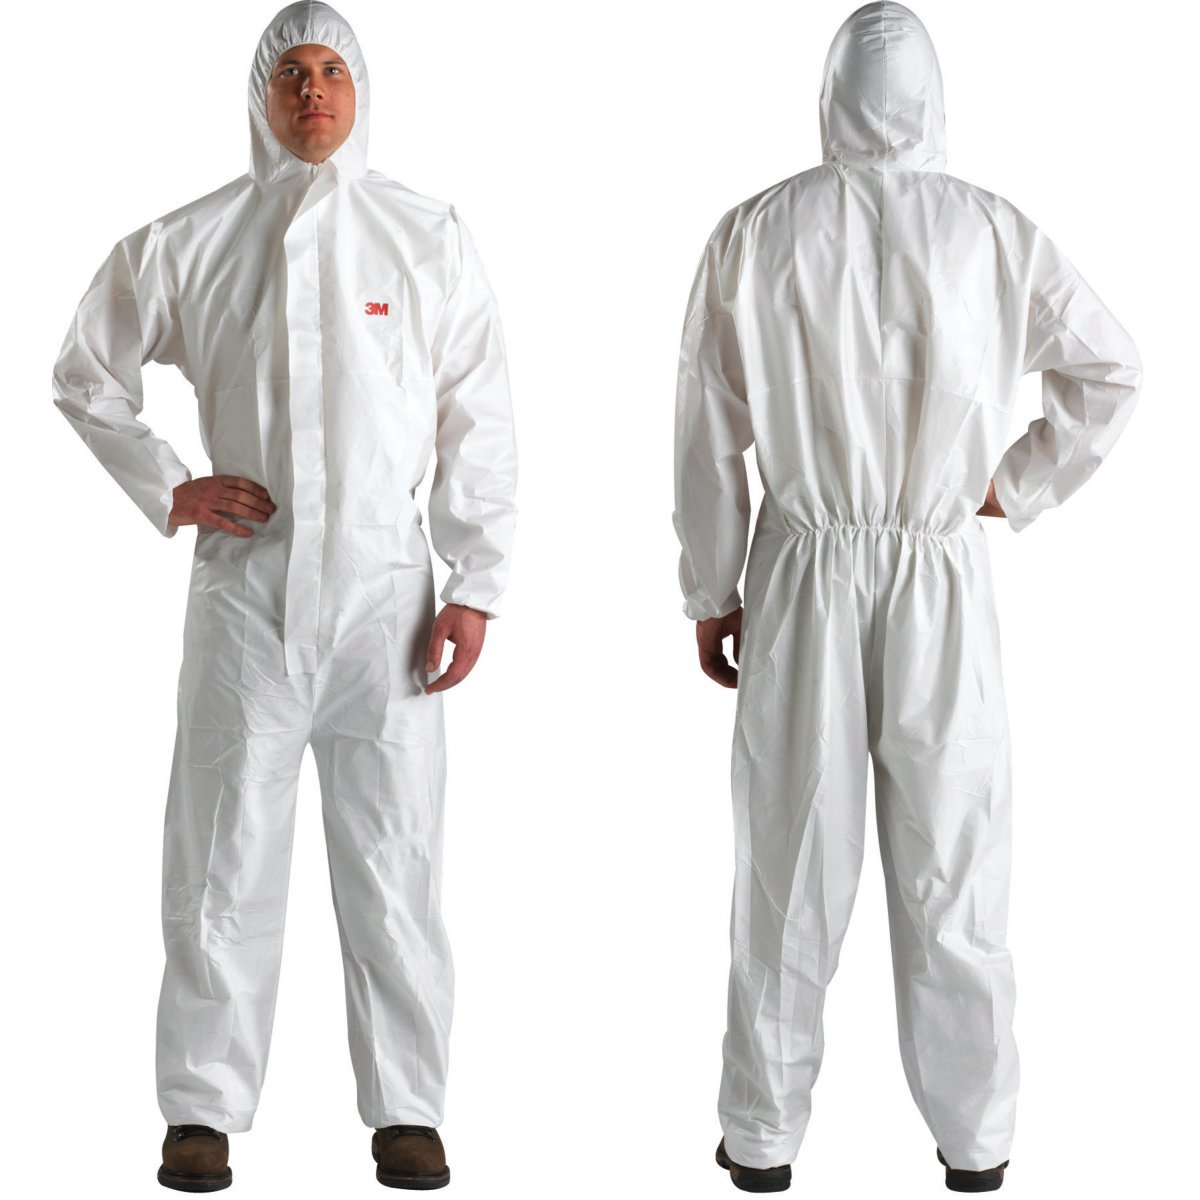 3M™ Disposable Protective Coverall 4510 Bulk XL White (Availability restrictions apply.)